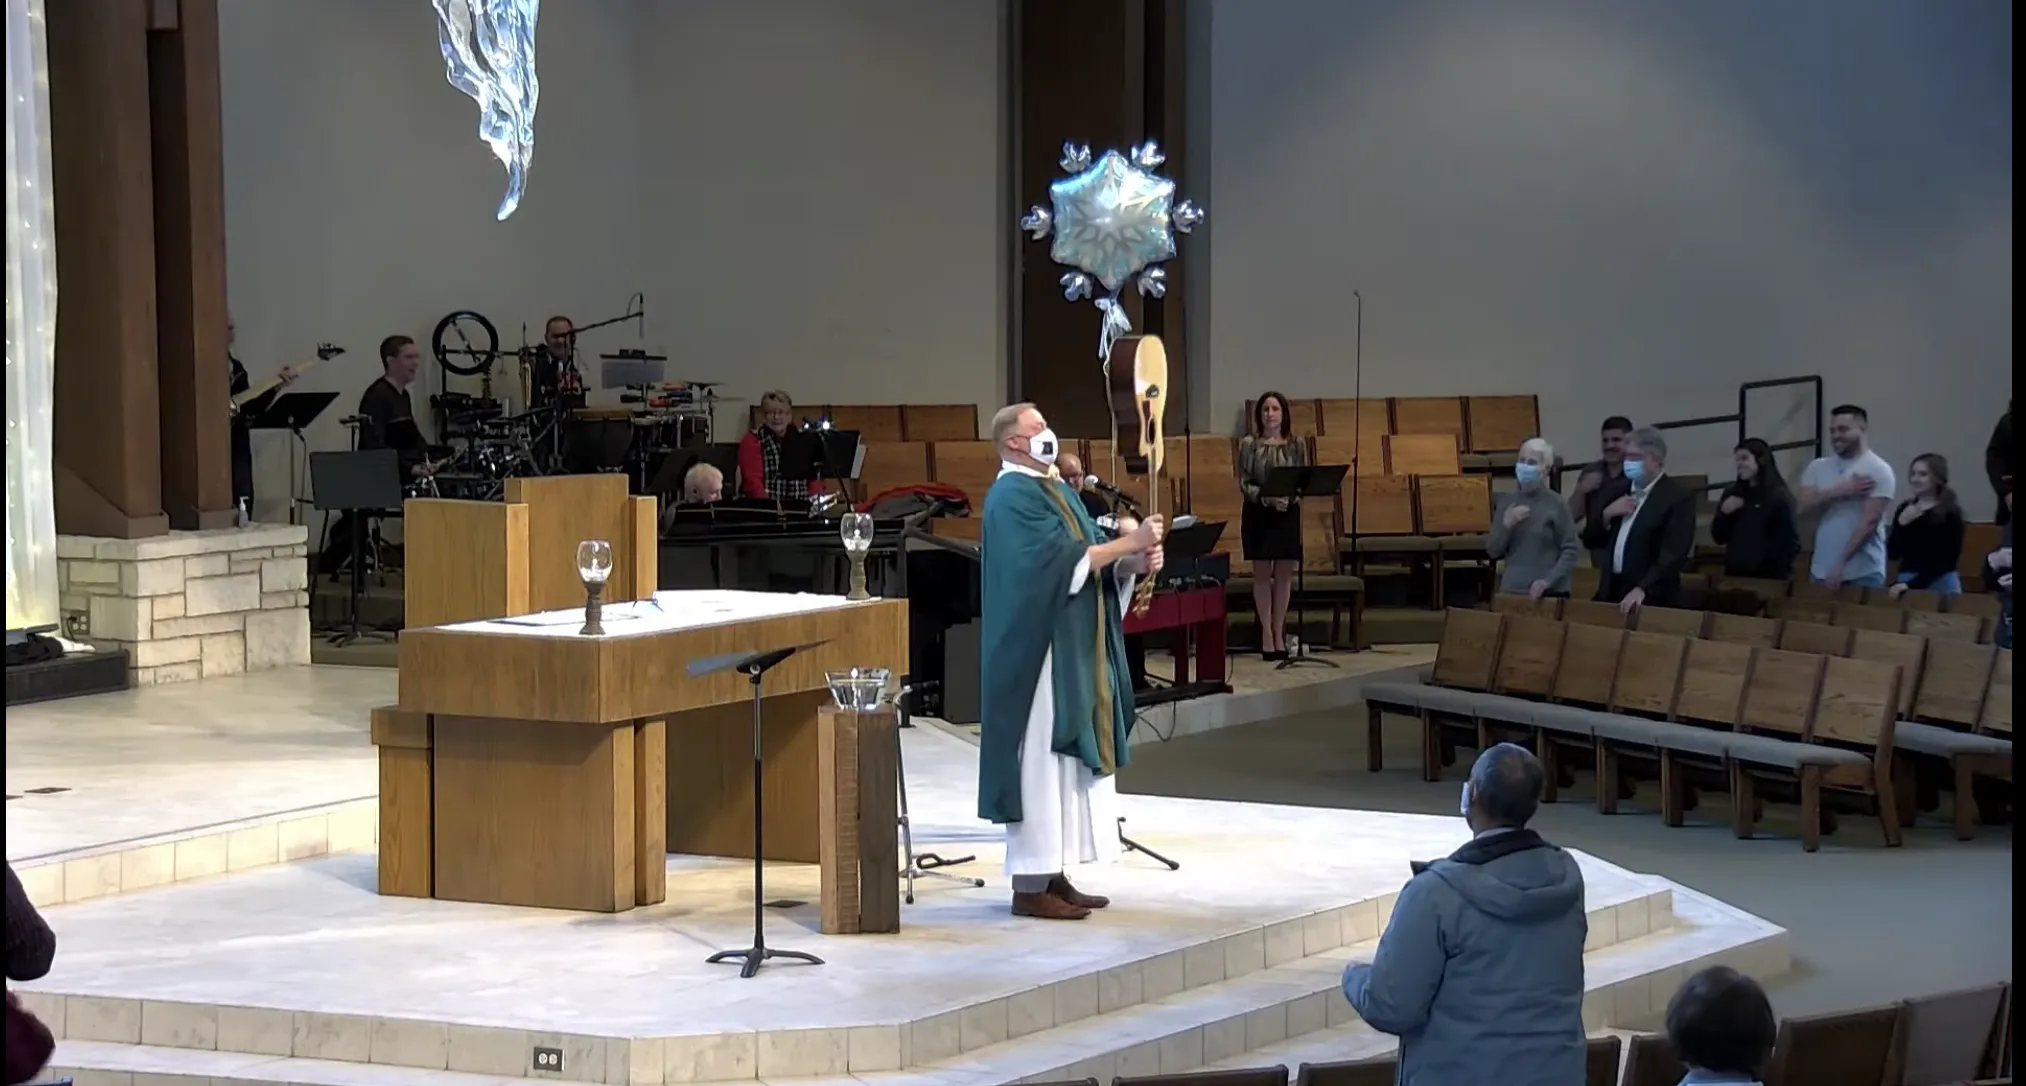 Father Terrence M. Keehan, pastor of Holy Family Church in Inverness, Illinois, blesses the congregation with a guitar at the end of Sunday Mass on Feb. 13, 2022. Screenshot of YouTube video